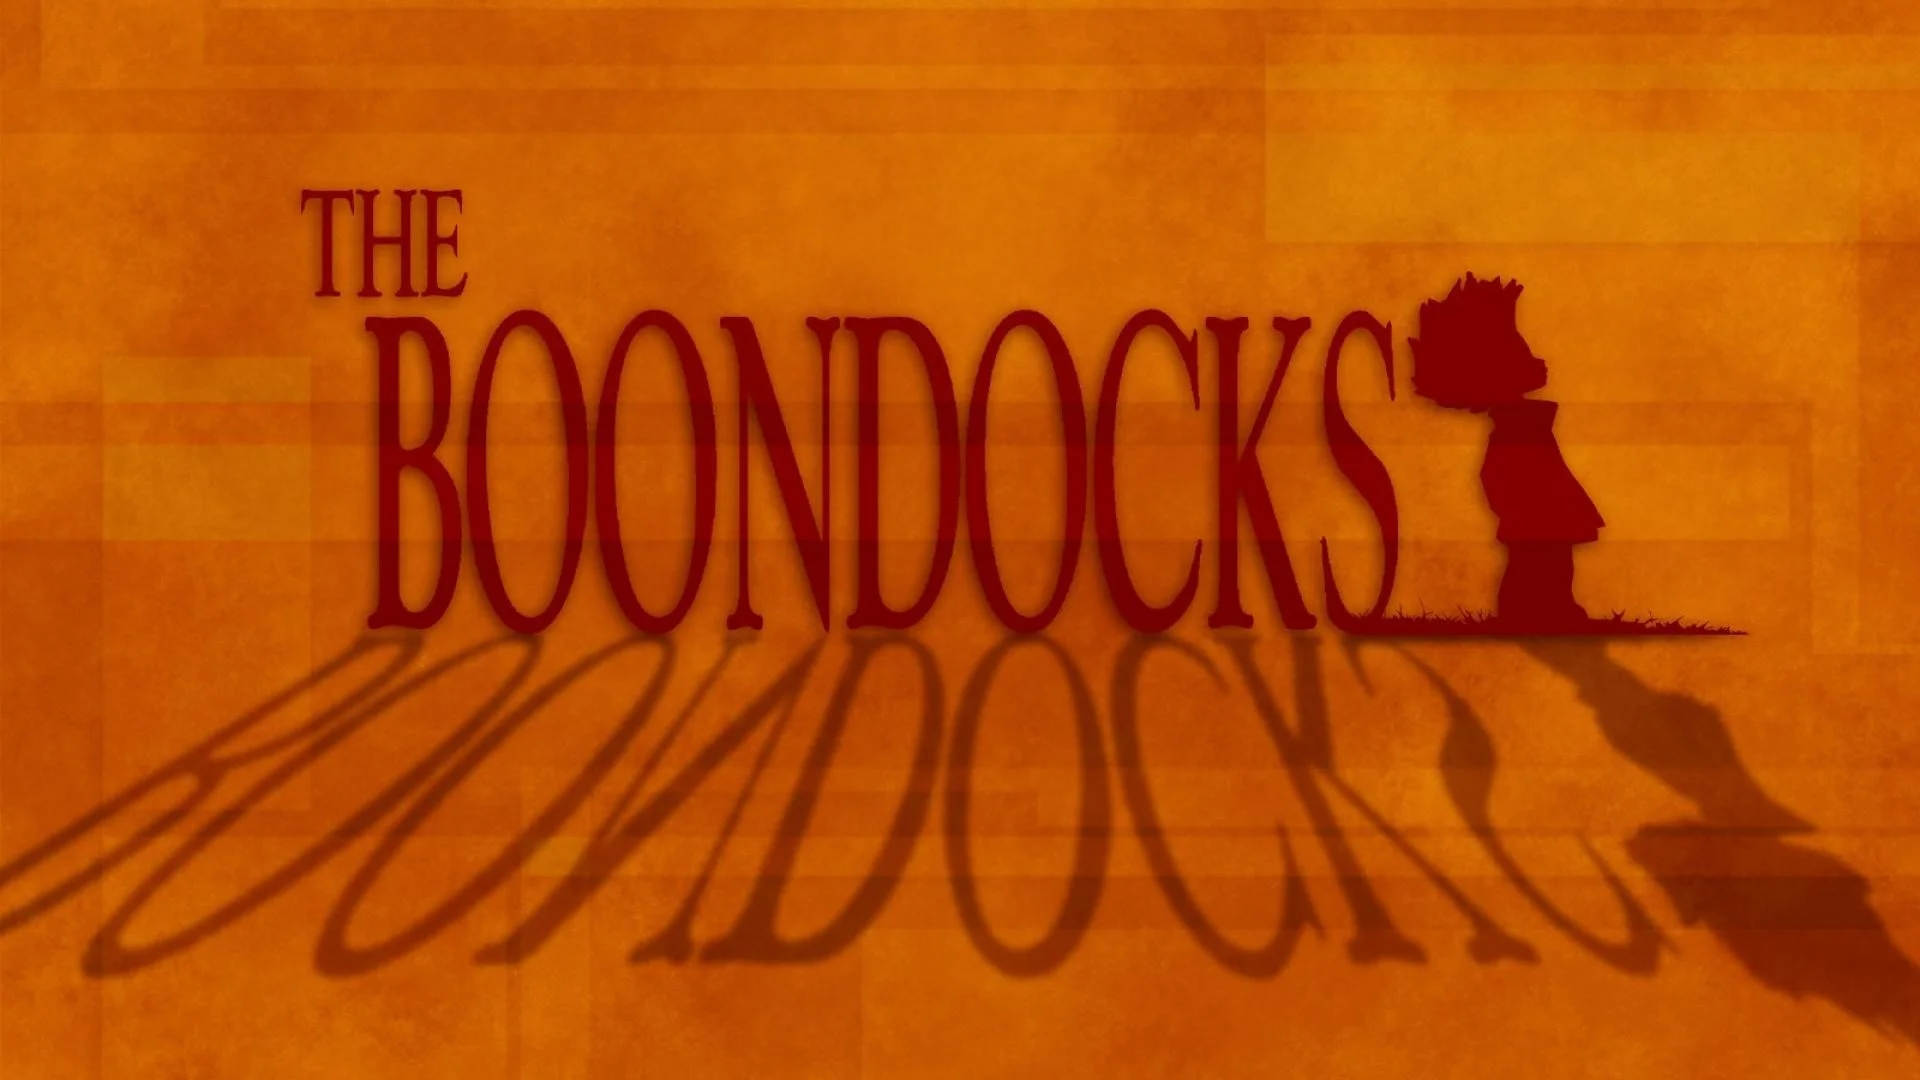 The boondocks american animated series poster hd wallpaper